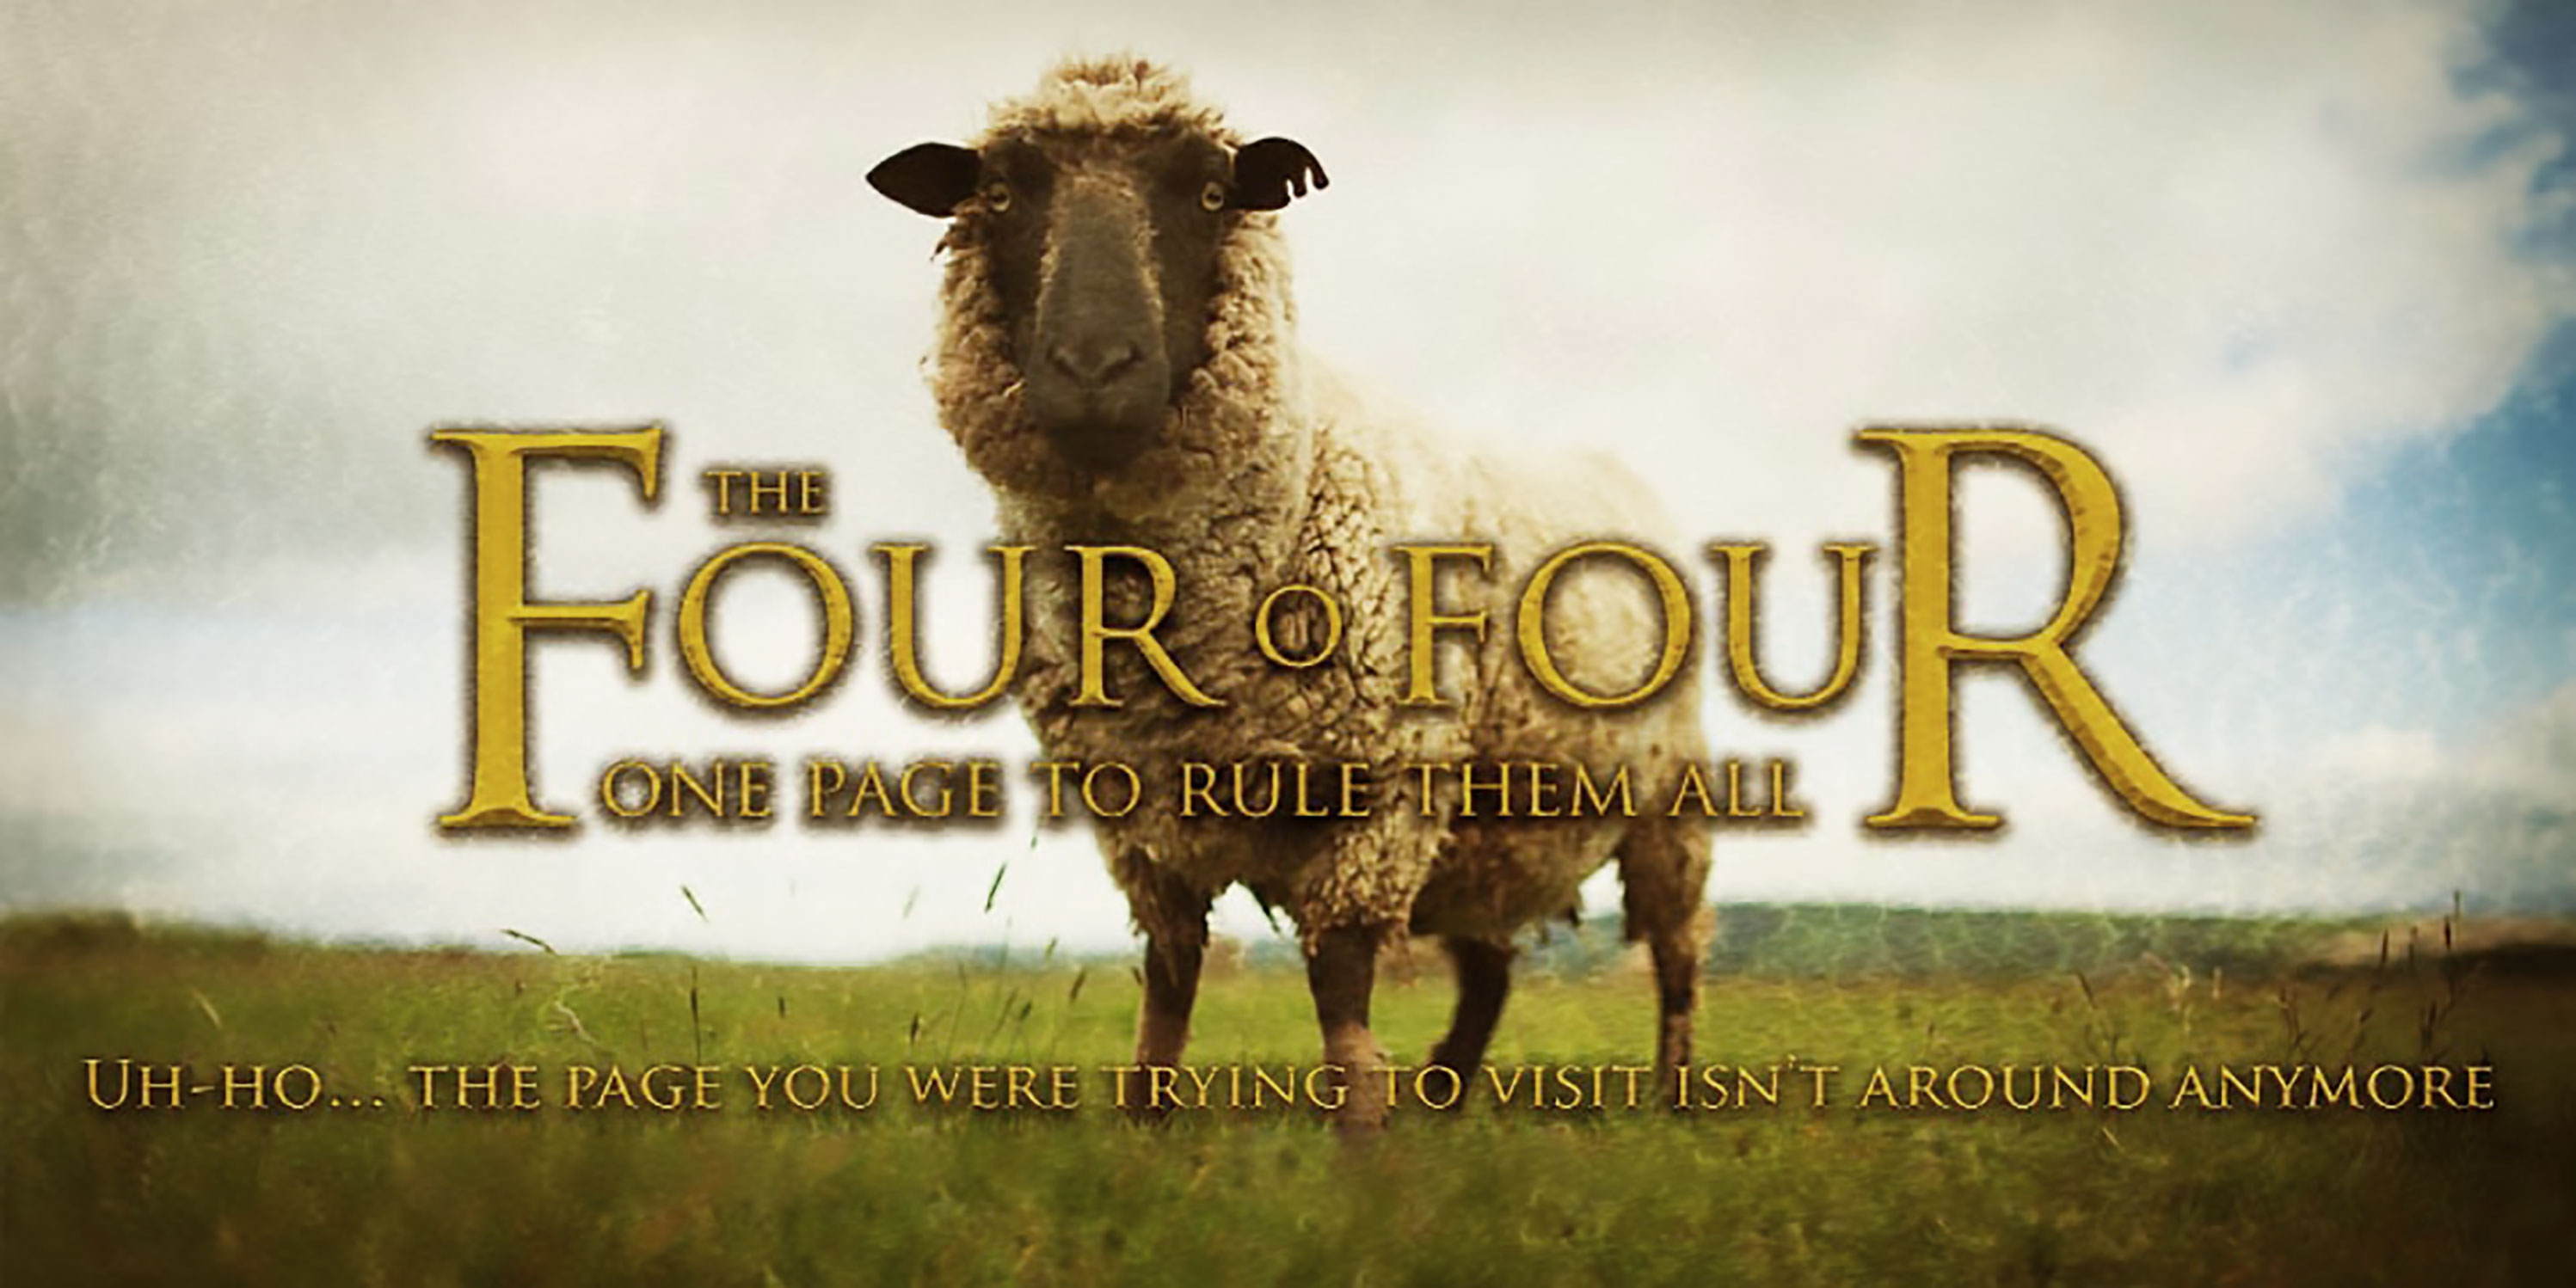 The Four O Four, one page to rule them all. The image of a New Zealand sheep, alone, that lost itself, like in the 'The Lord of the Rings'